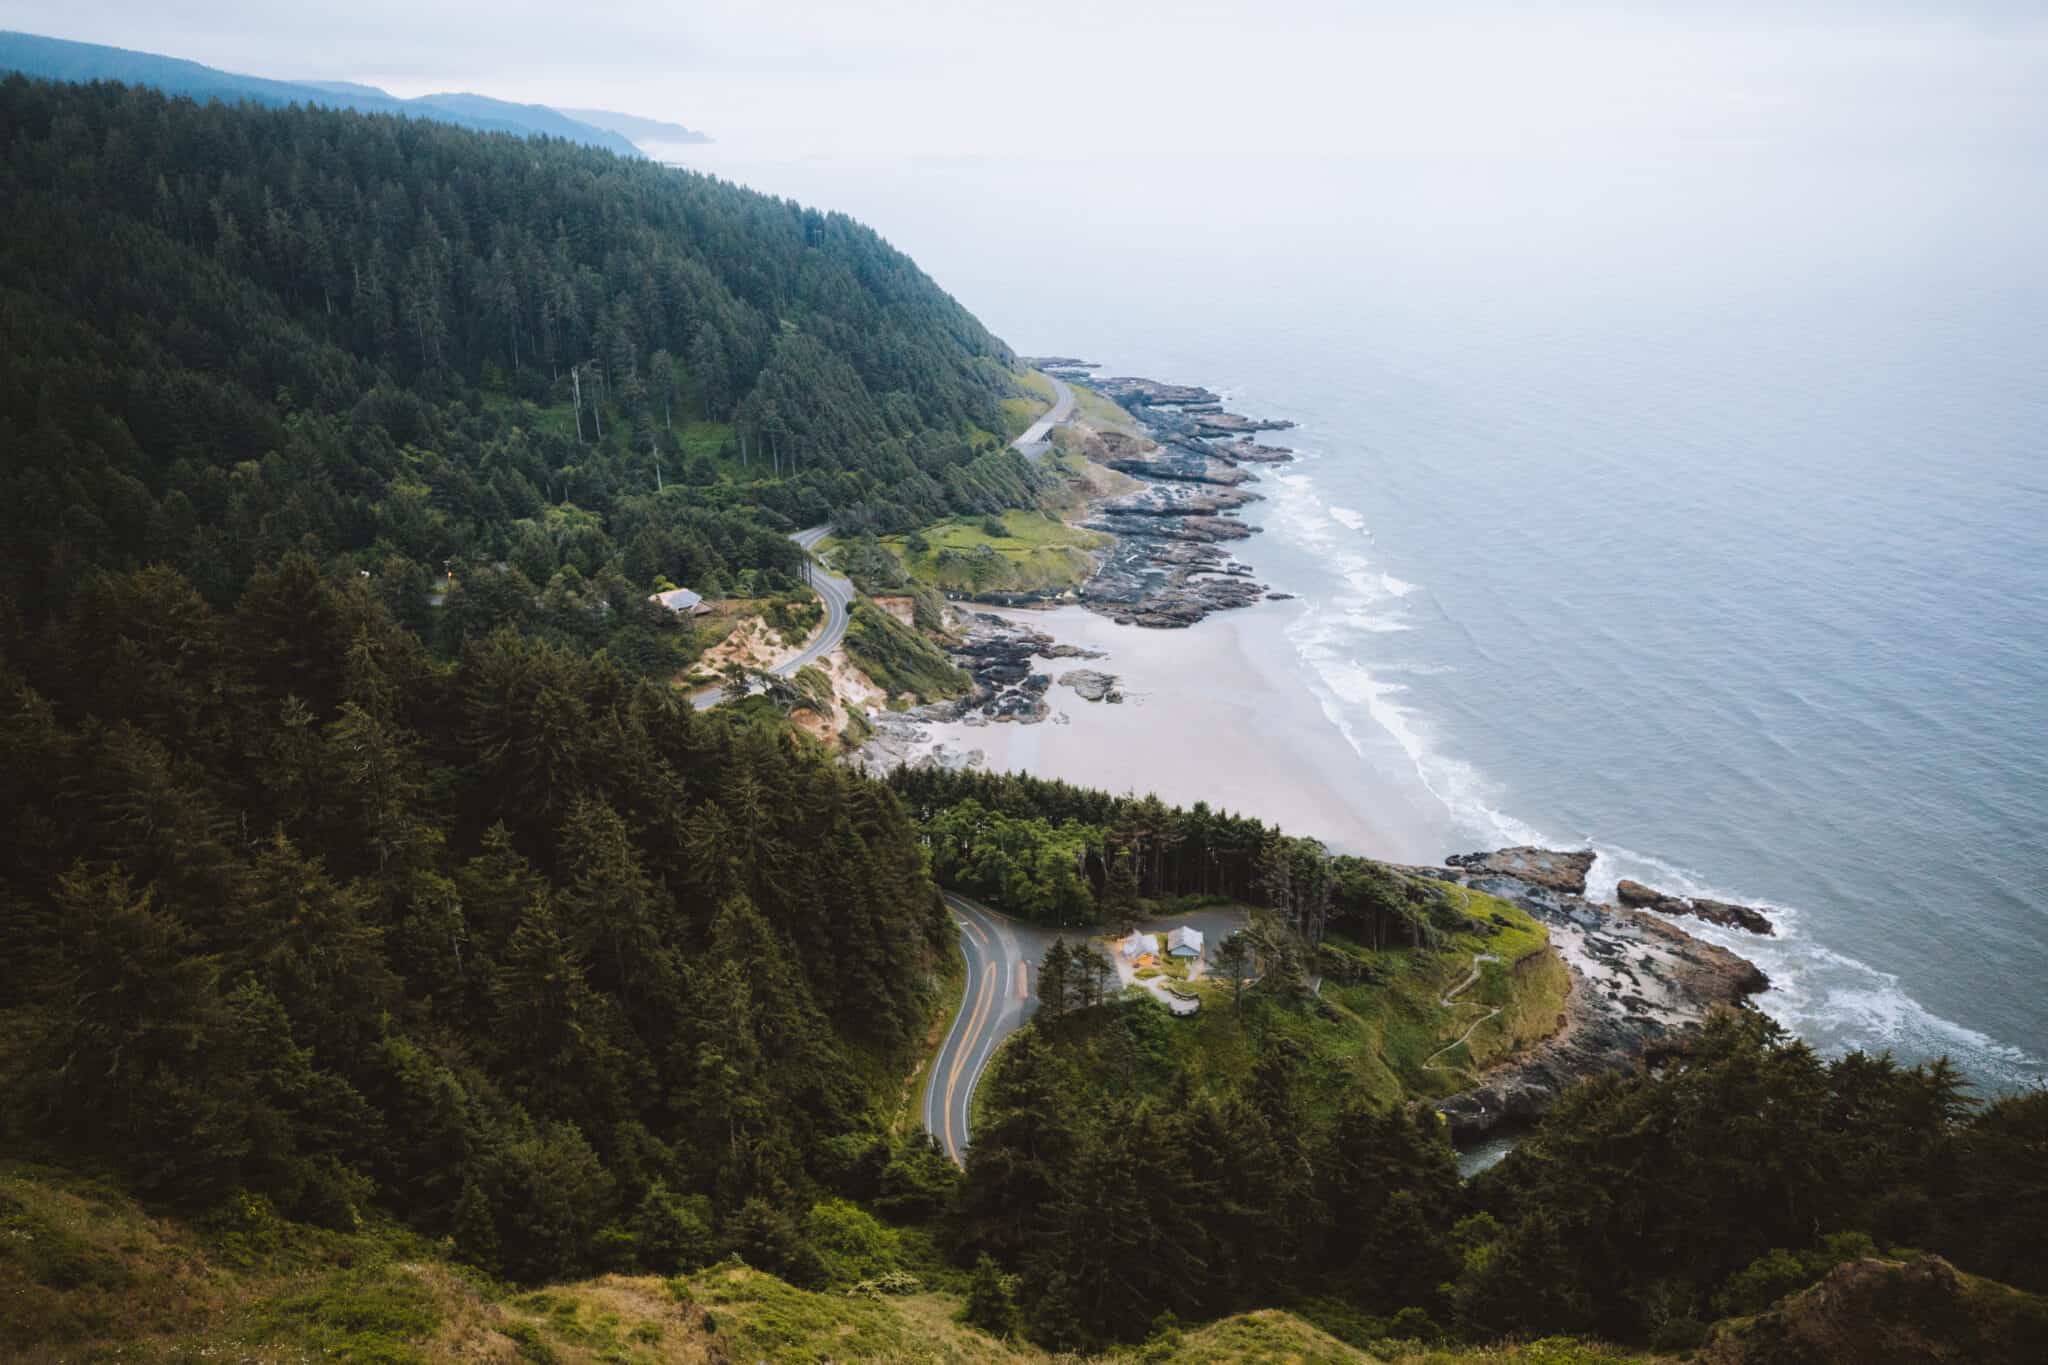 A Guide to the Top 8 Things to See and Do in Yachats, Oregon